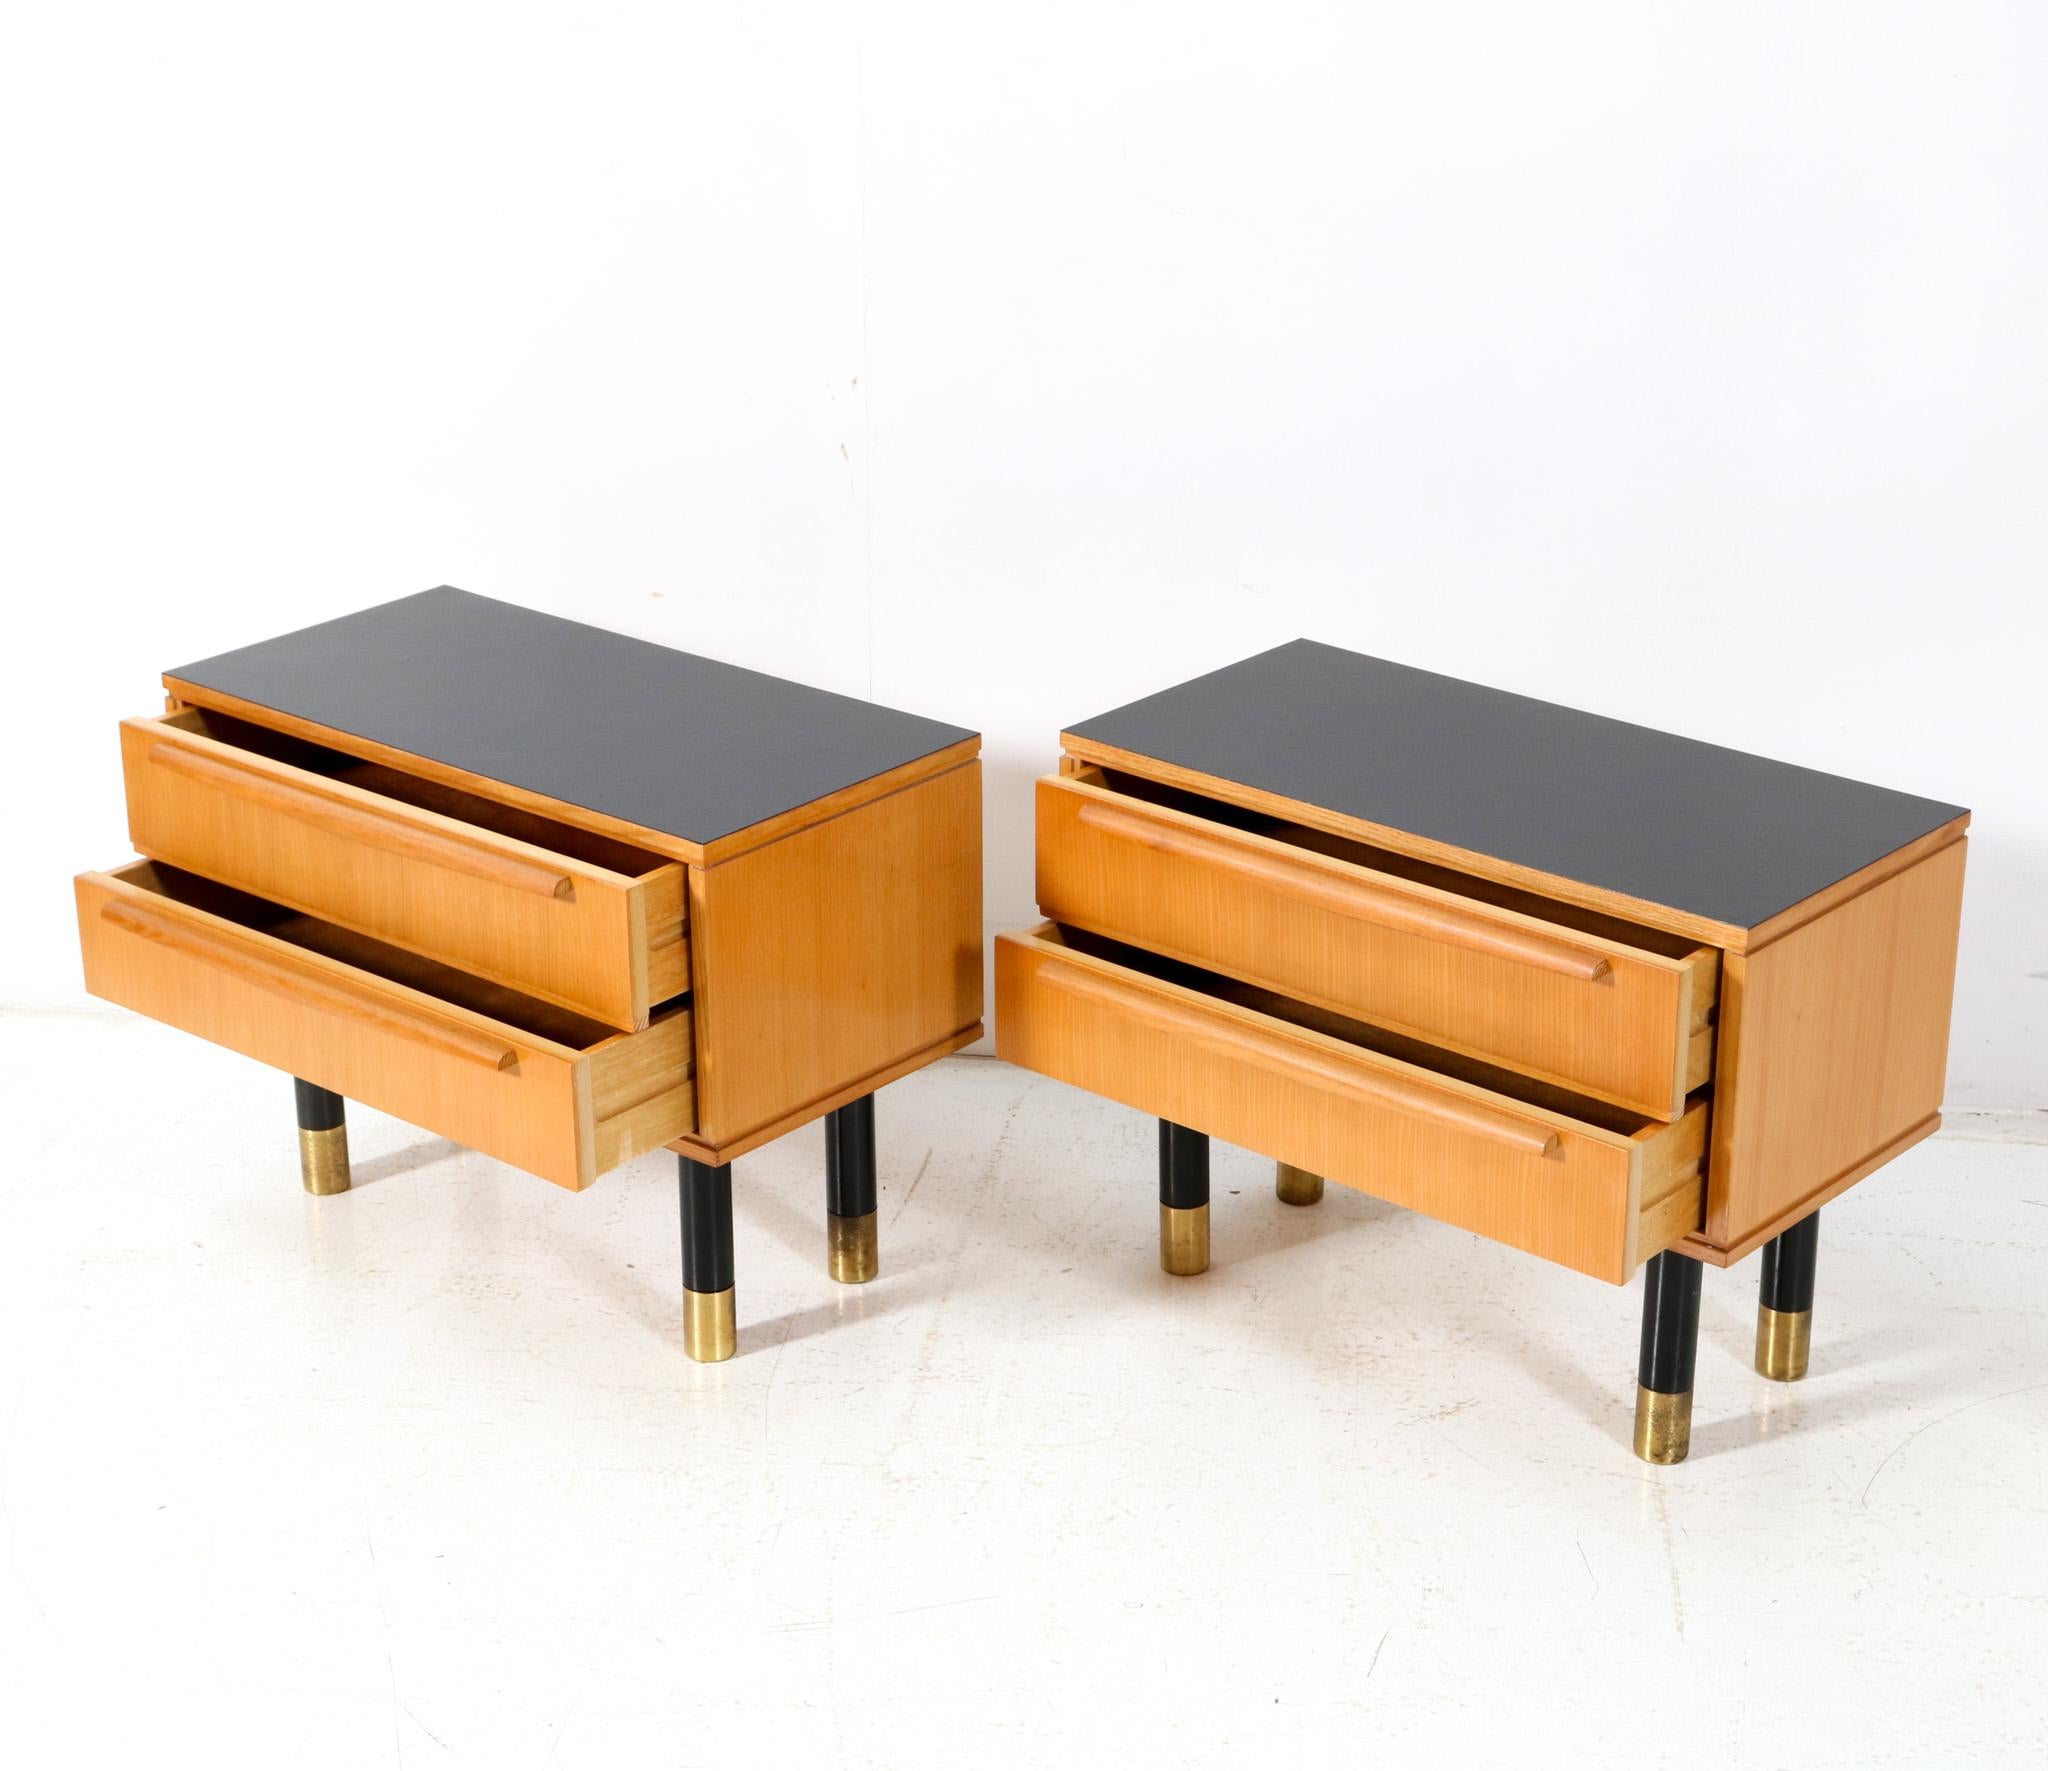 Two Ash Mid-Century Modern Nightstands or Bedside Tables, 1950s In Good Condition For Sale In Amsterdam, NL